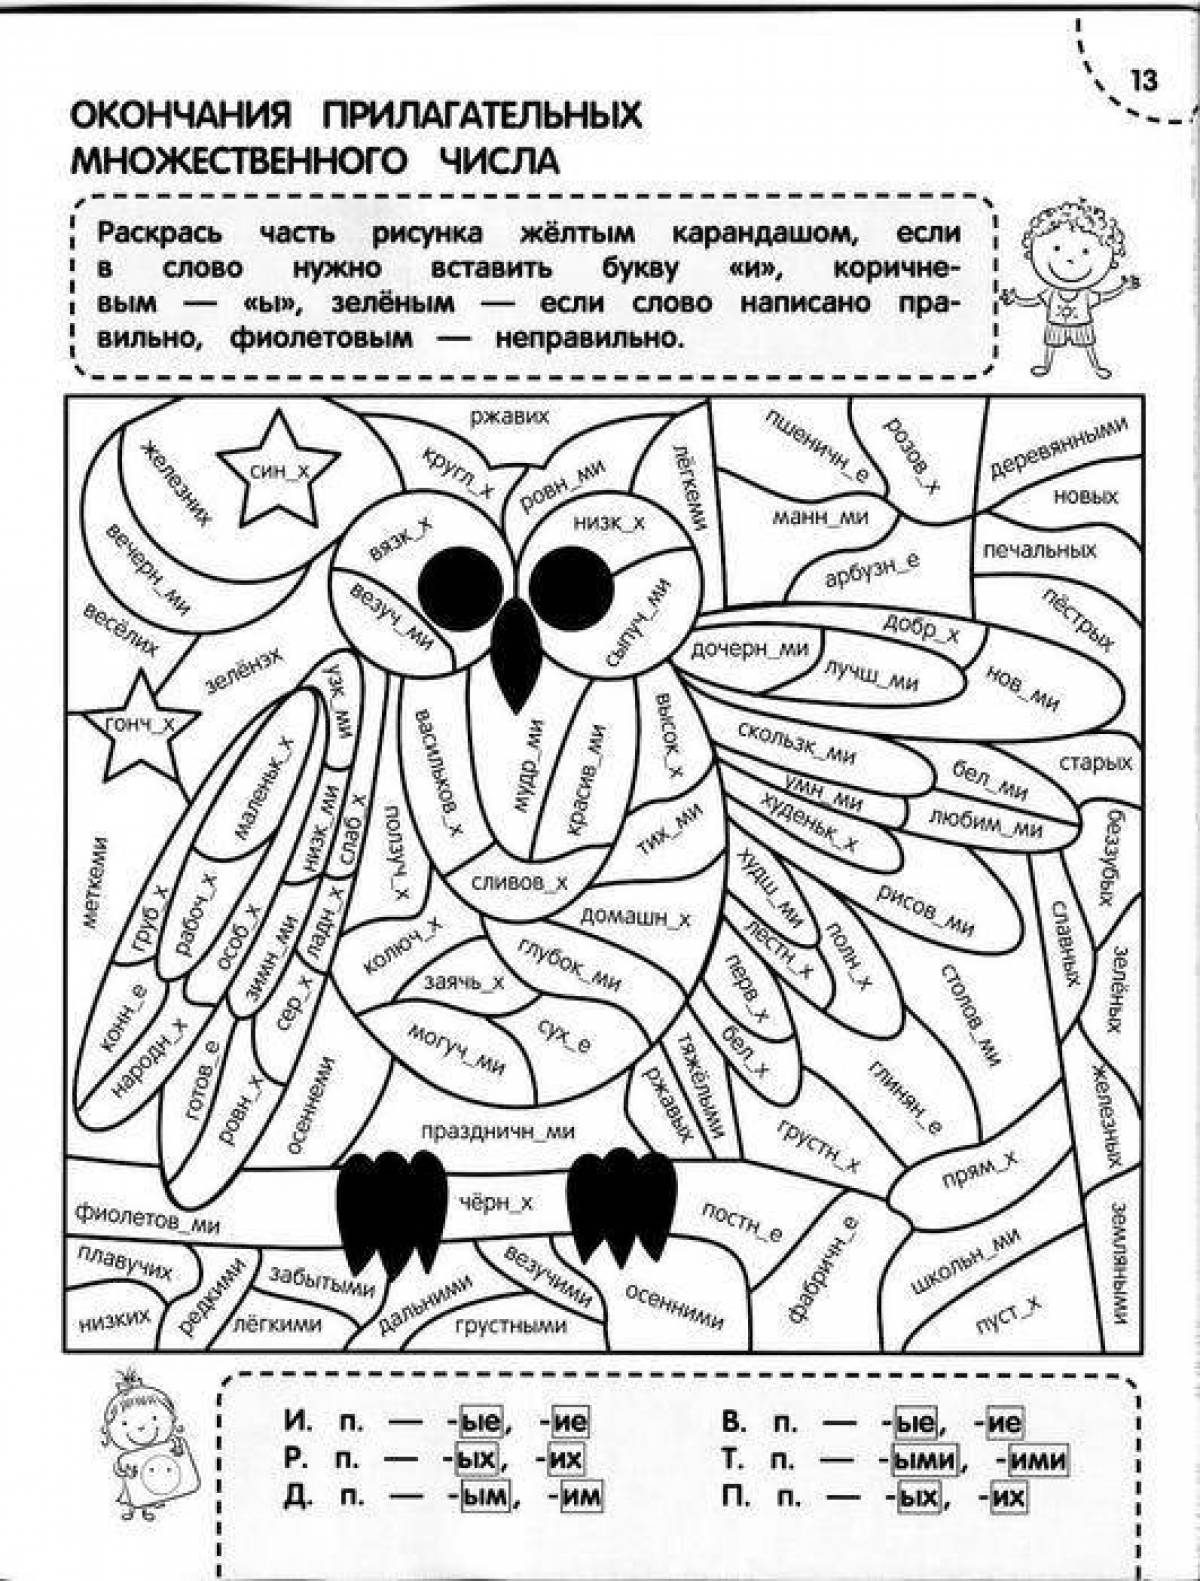 A fascinating coloring book in Russian